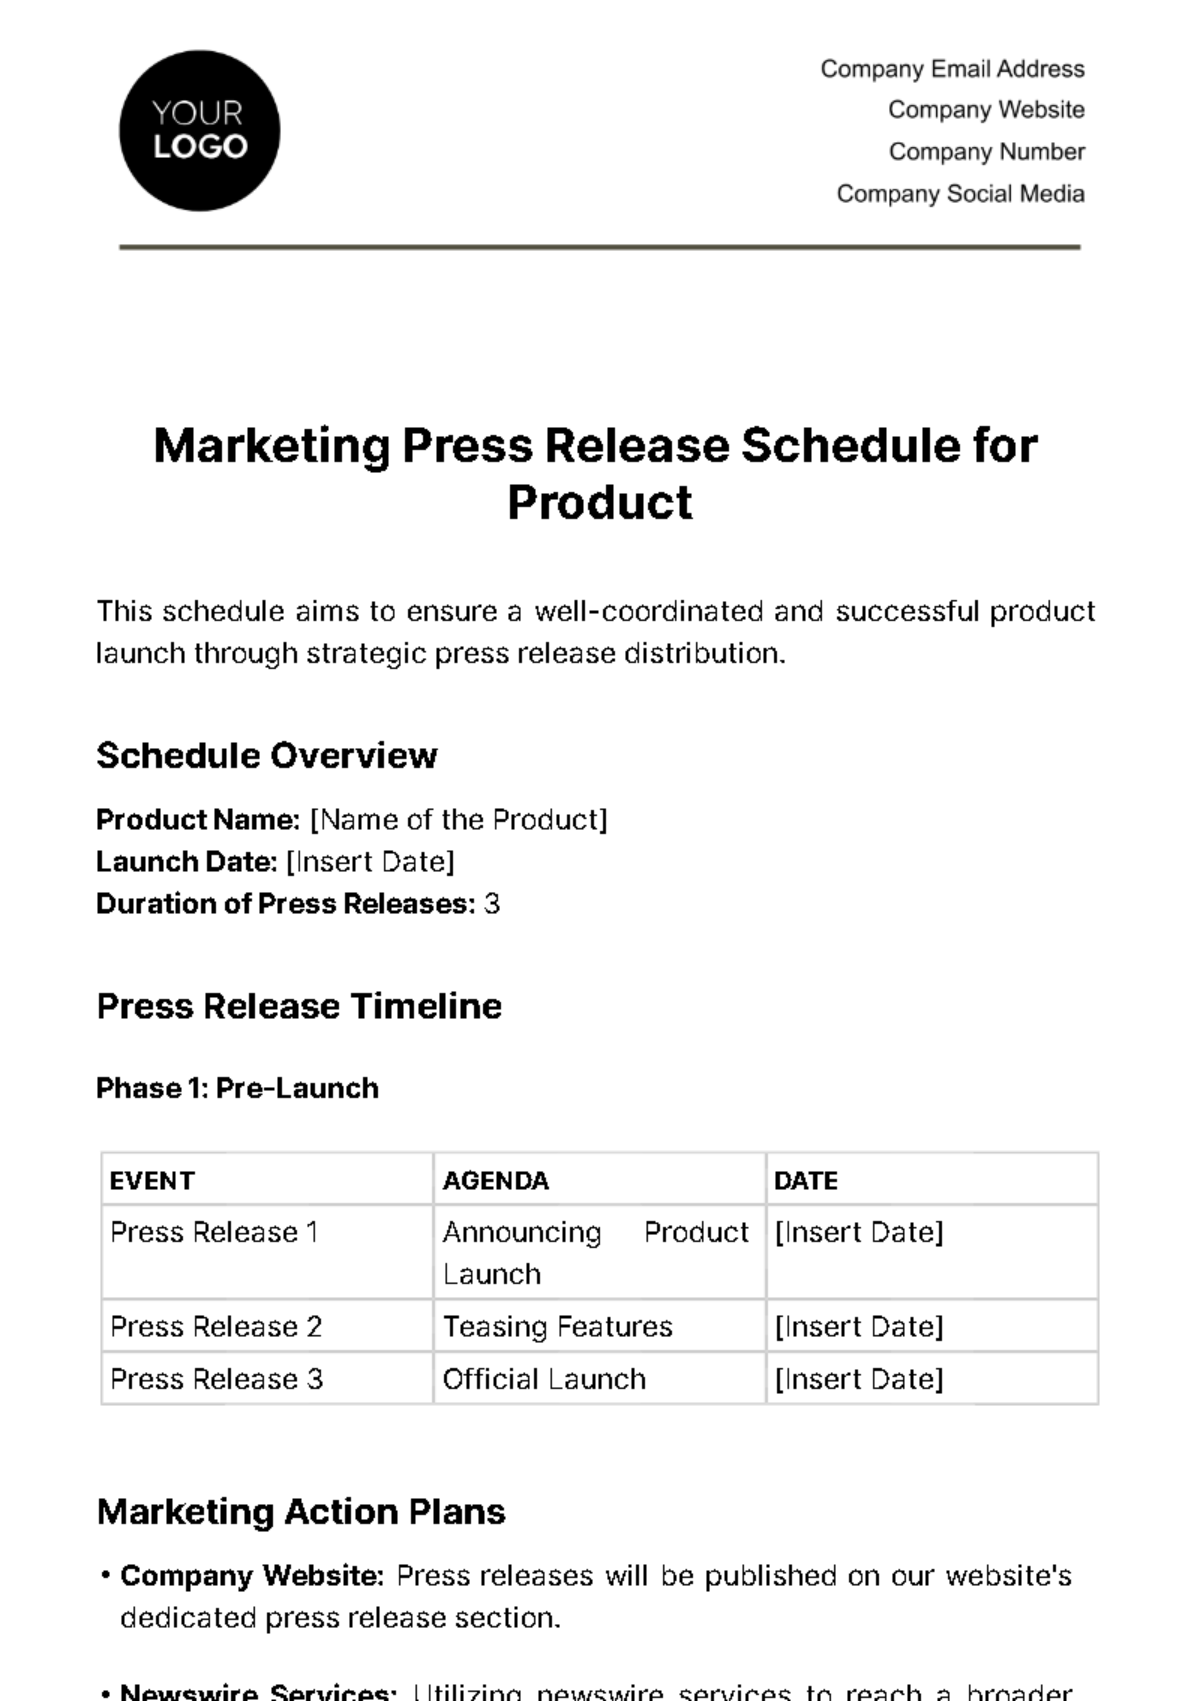 Marketing Press Release Schedule for Product Template